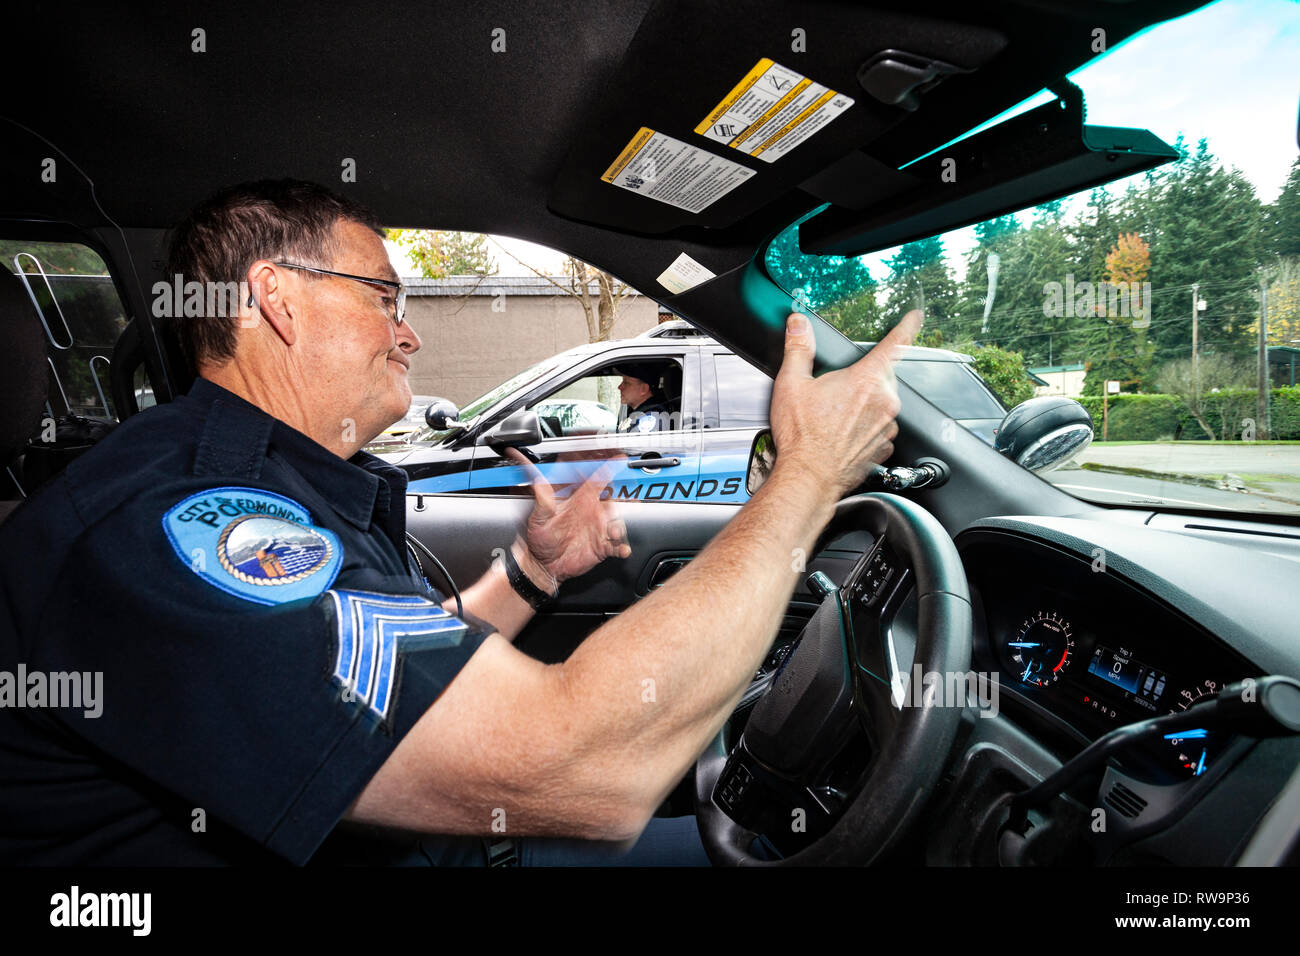 PE00381-00...WASHINGTON - Sergeant Robert Barker of the Edmonds Police Department talks with another officer during patrol. Stock Photo